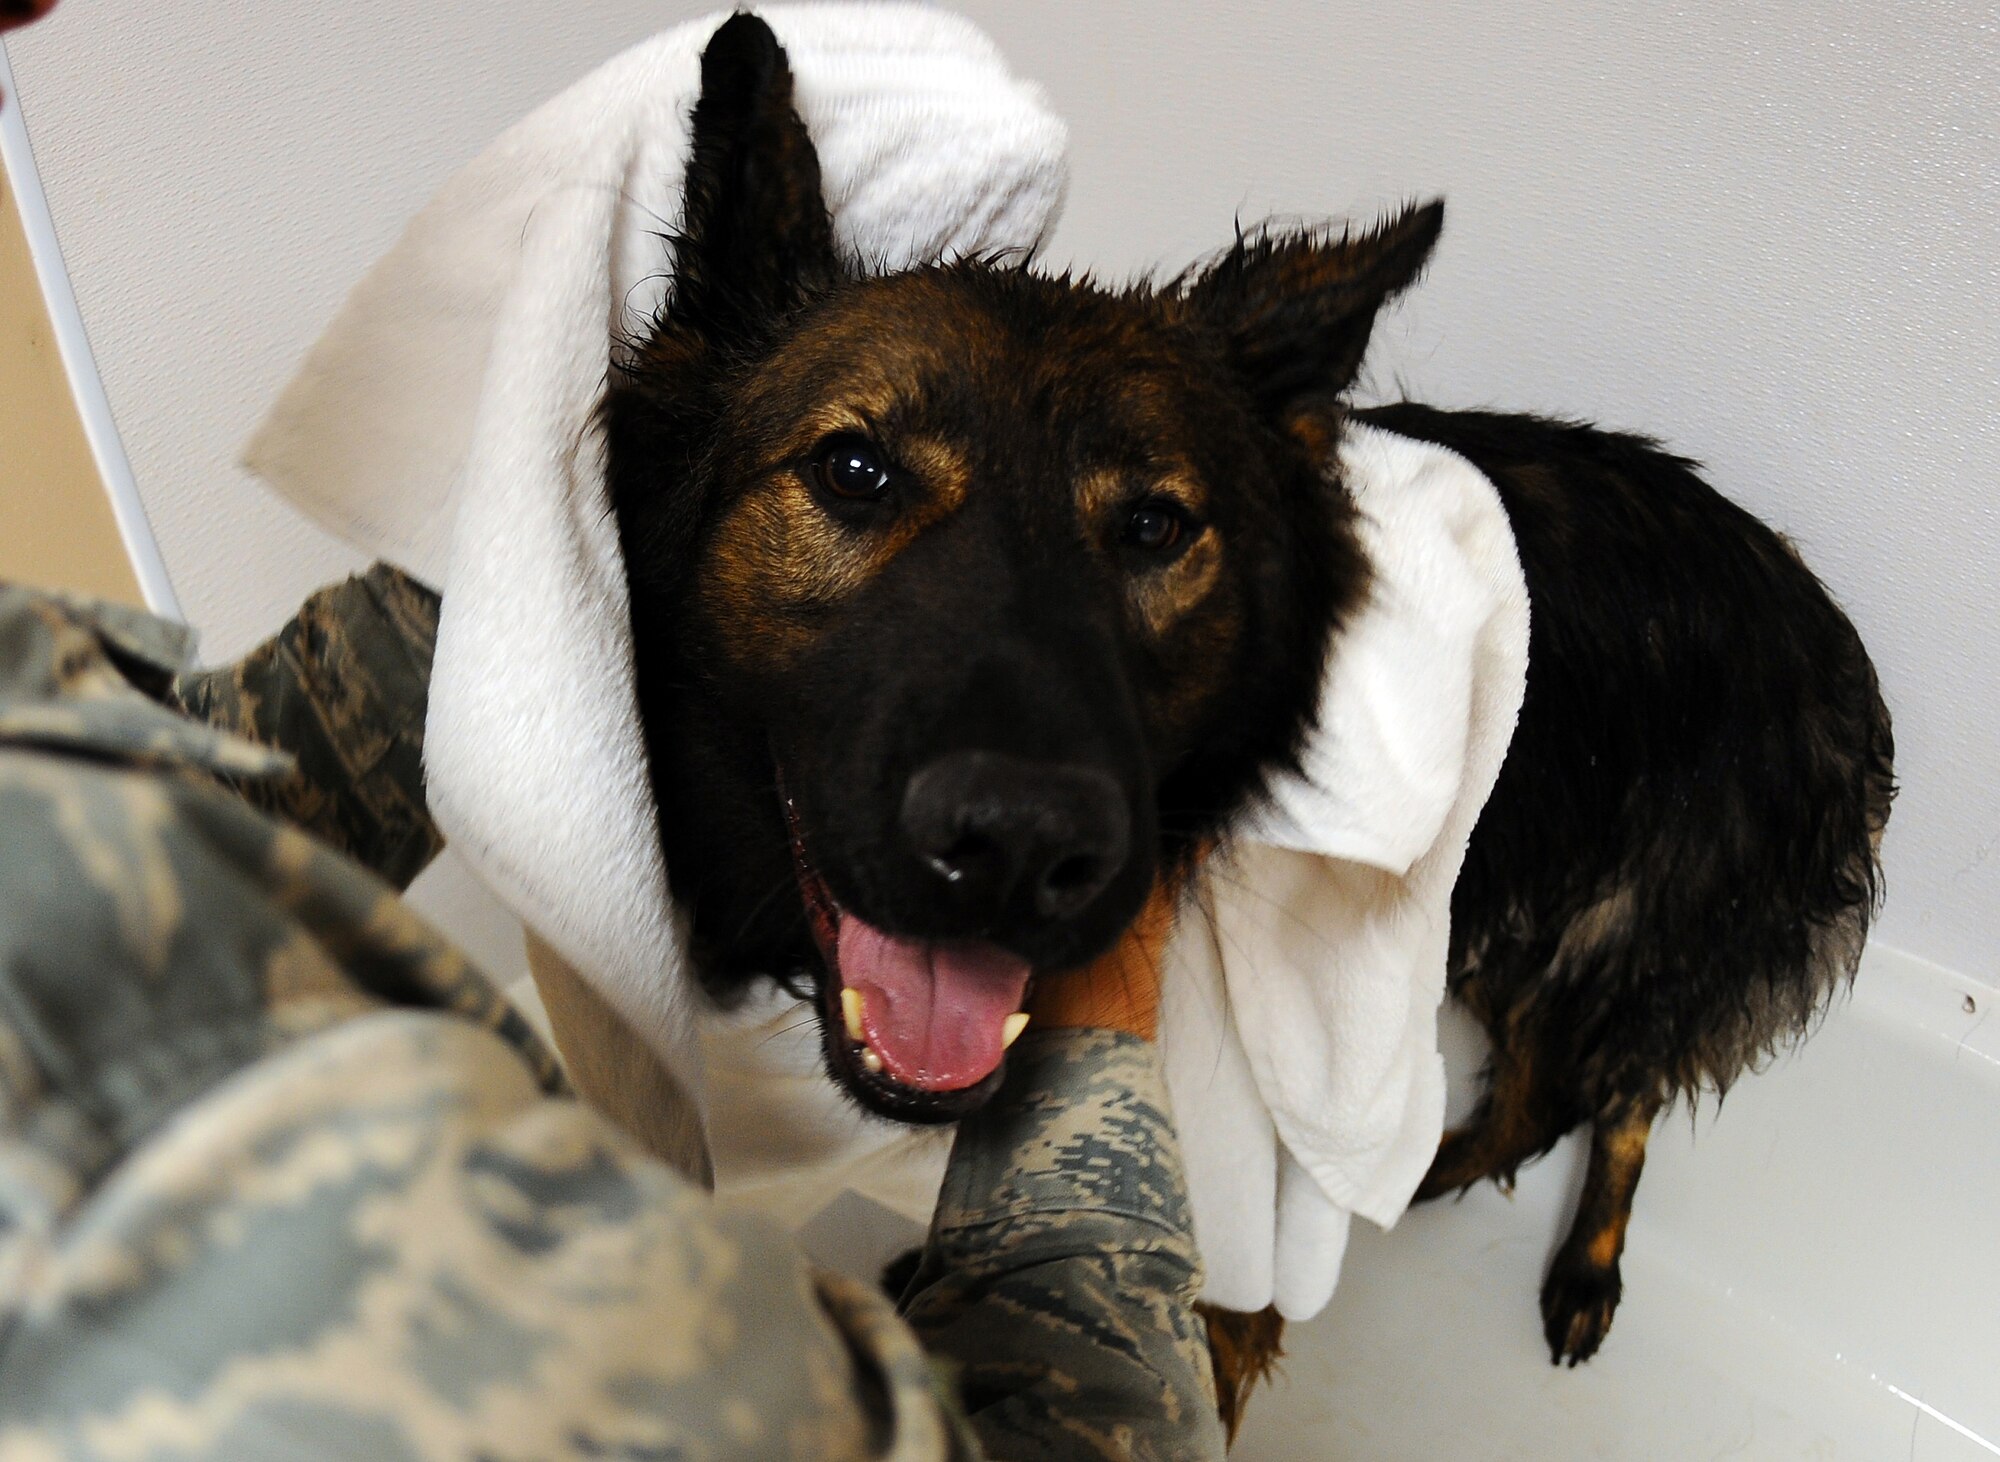 OFFUTT AIR FORCE BASE, Neb. - Dasty, a three-year-old male Belgian Tervuren, gets dried off after his monthly bath by his partner Staff Sgt. Joel Therrien, a military working dog handler with the 55th Security Forces Squadron Dec. 1.  Cleanliness is essential to keeping the dogs healthy and mission ready.  U.S. Air Force Photo by Josh Plueger (Released)